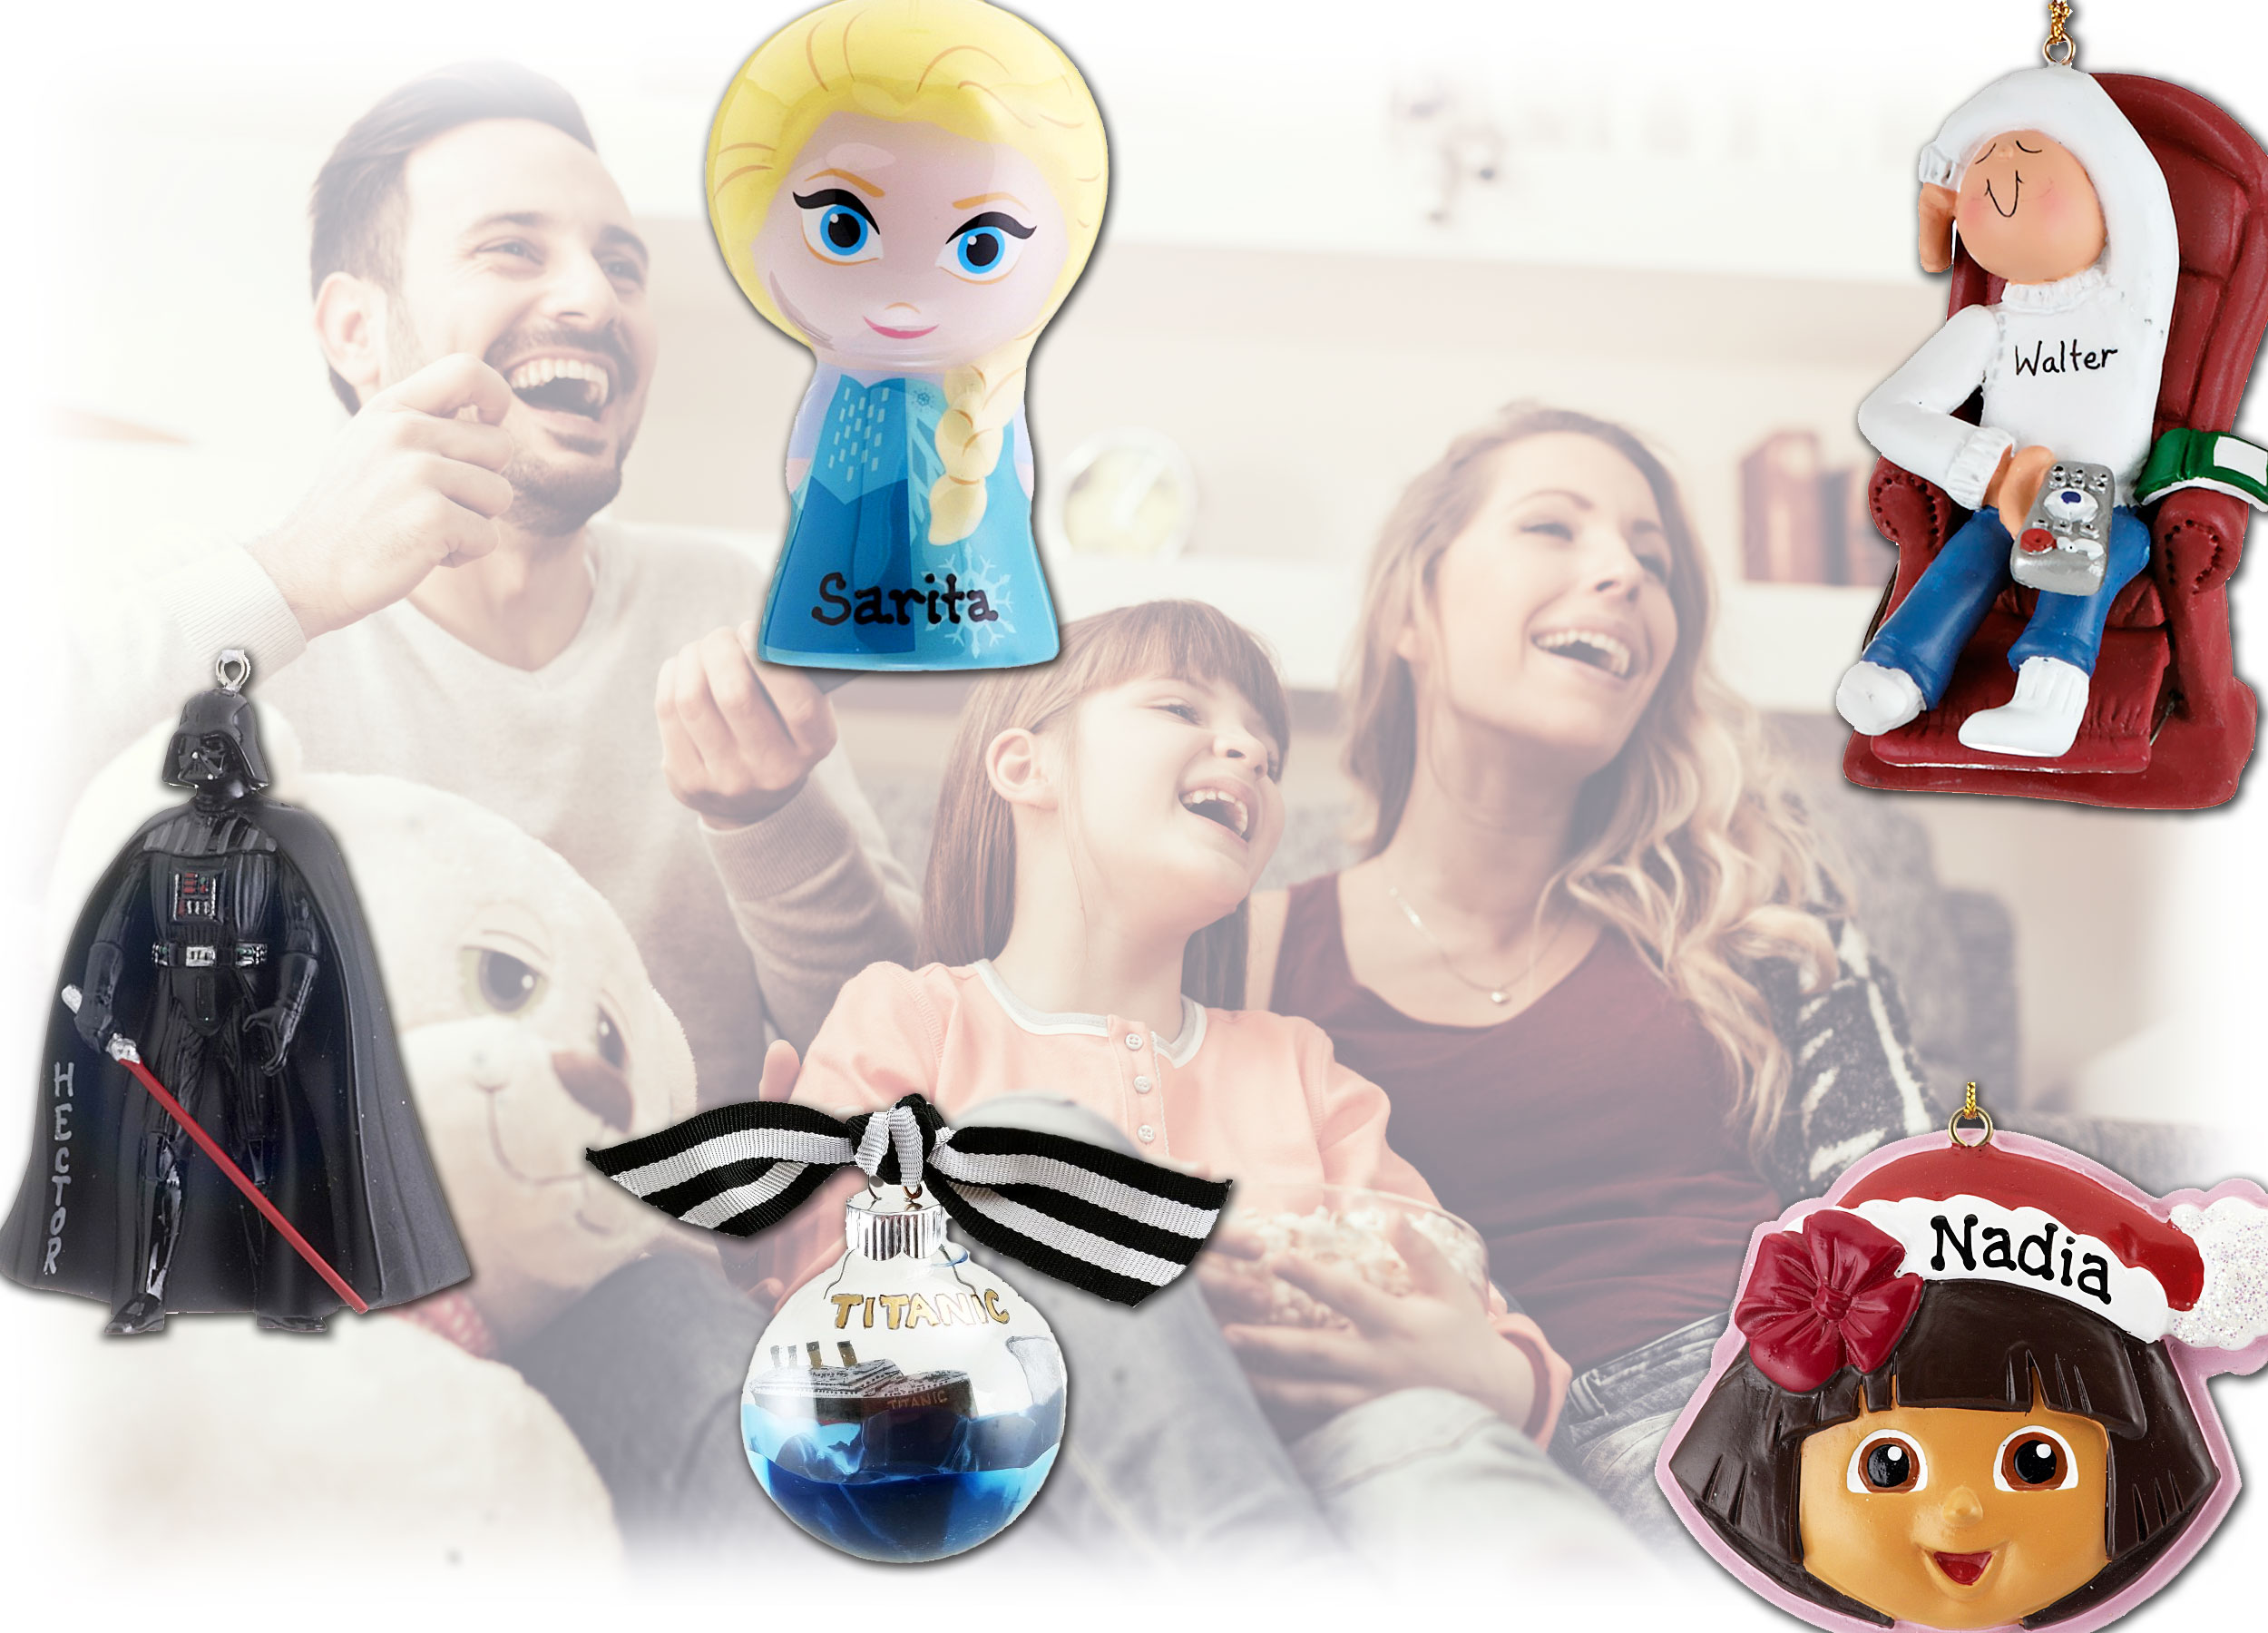 Find movie, TV show and series ornaments this Christmas. | OrnamentShop.com